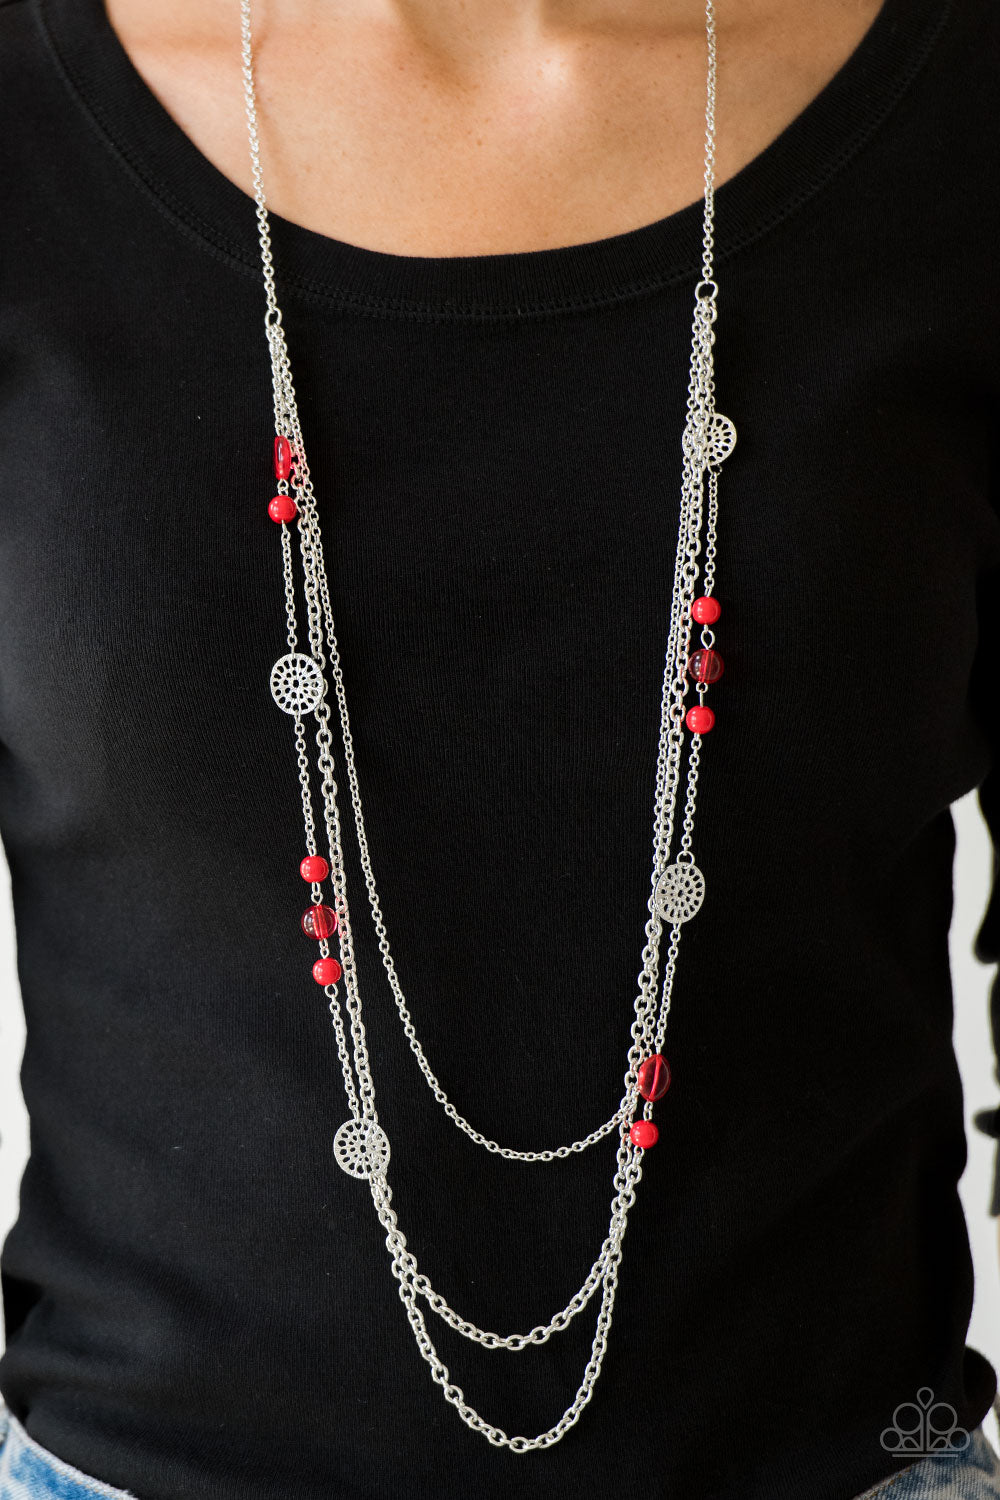 PRETTY POP-TASTIC! - RED BEADS NECKLACE